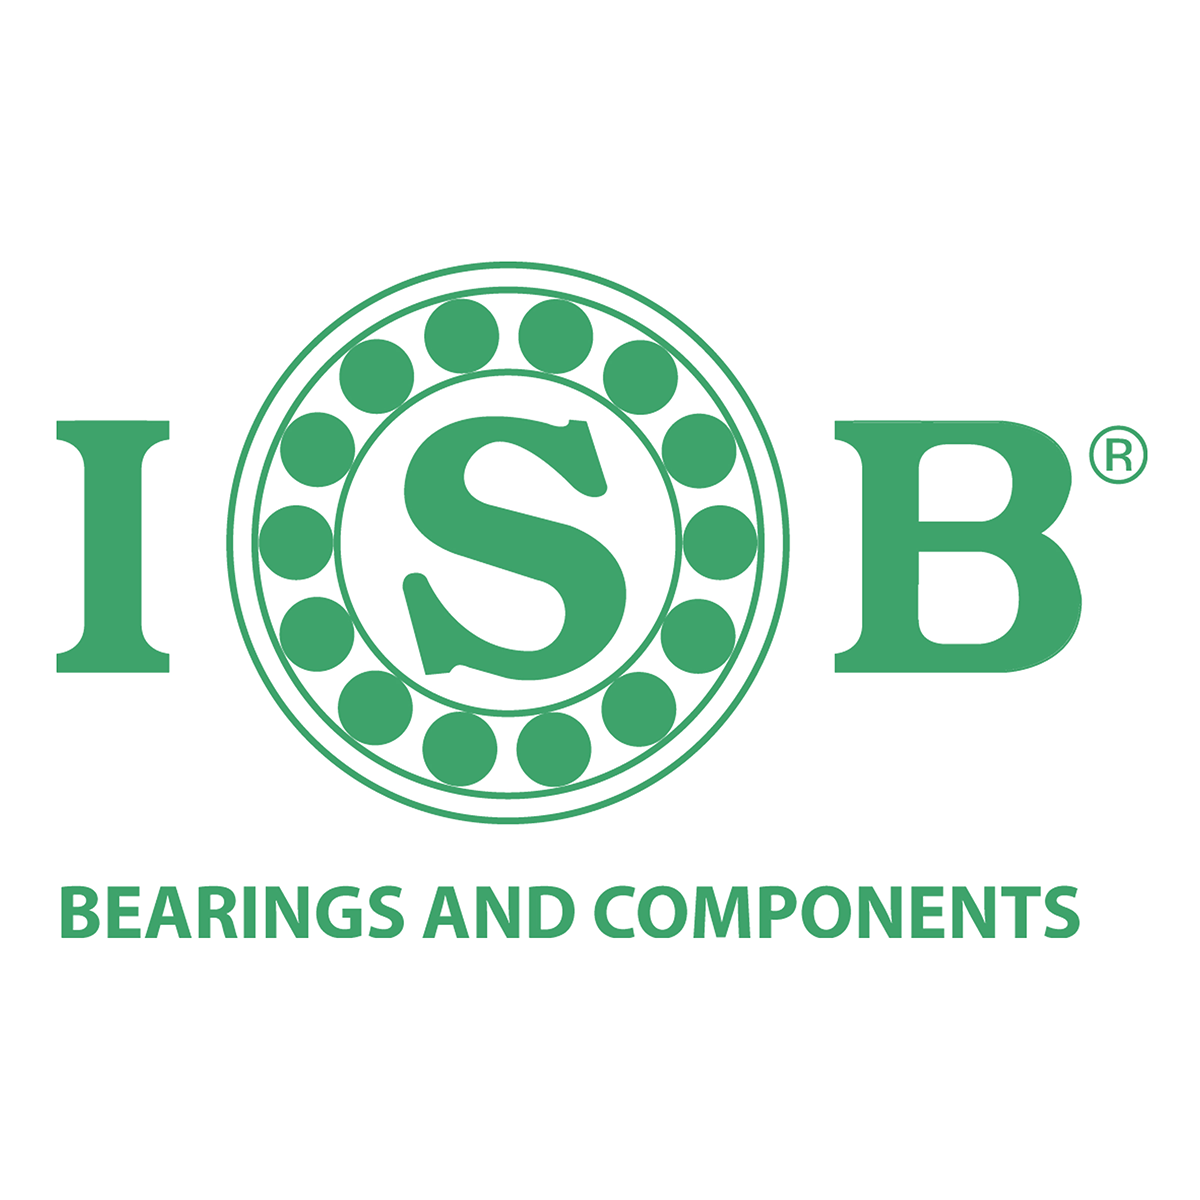 ISB Bearings and components logo